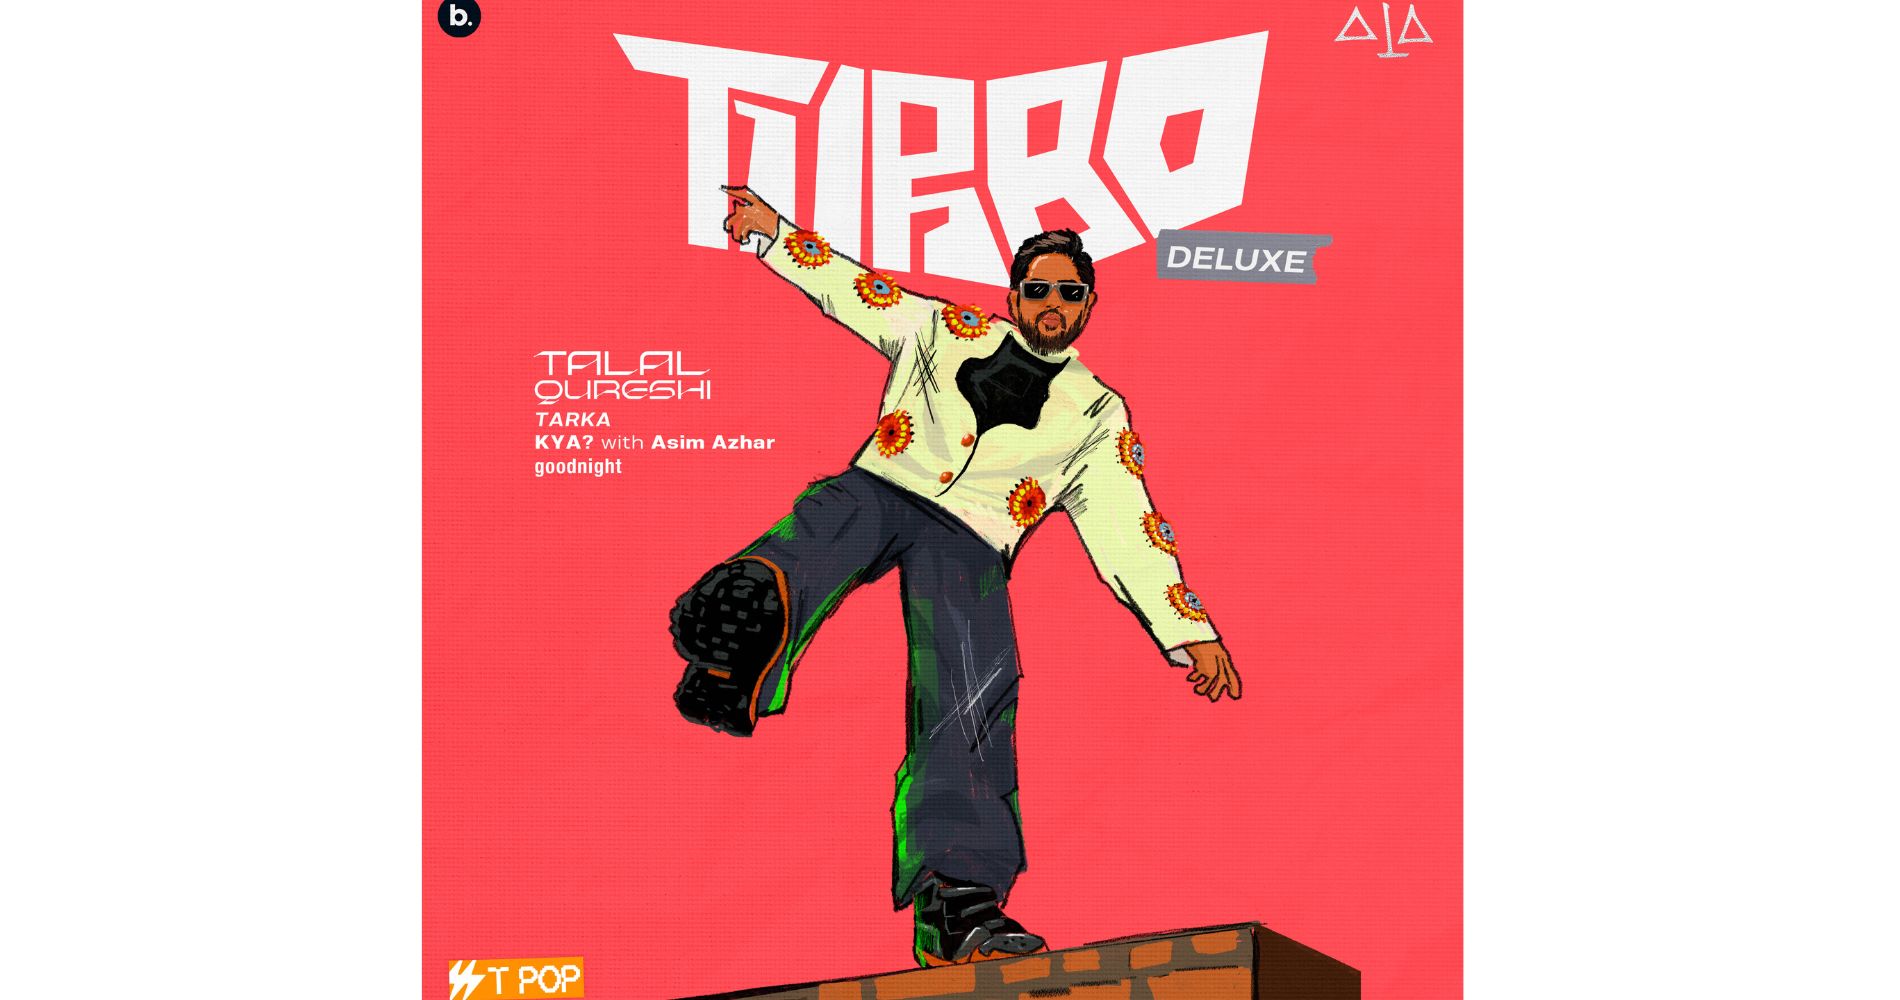 Talal Qureshi's Debut Album 'TURBO' Gets A Revamp With Exciting New Additions